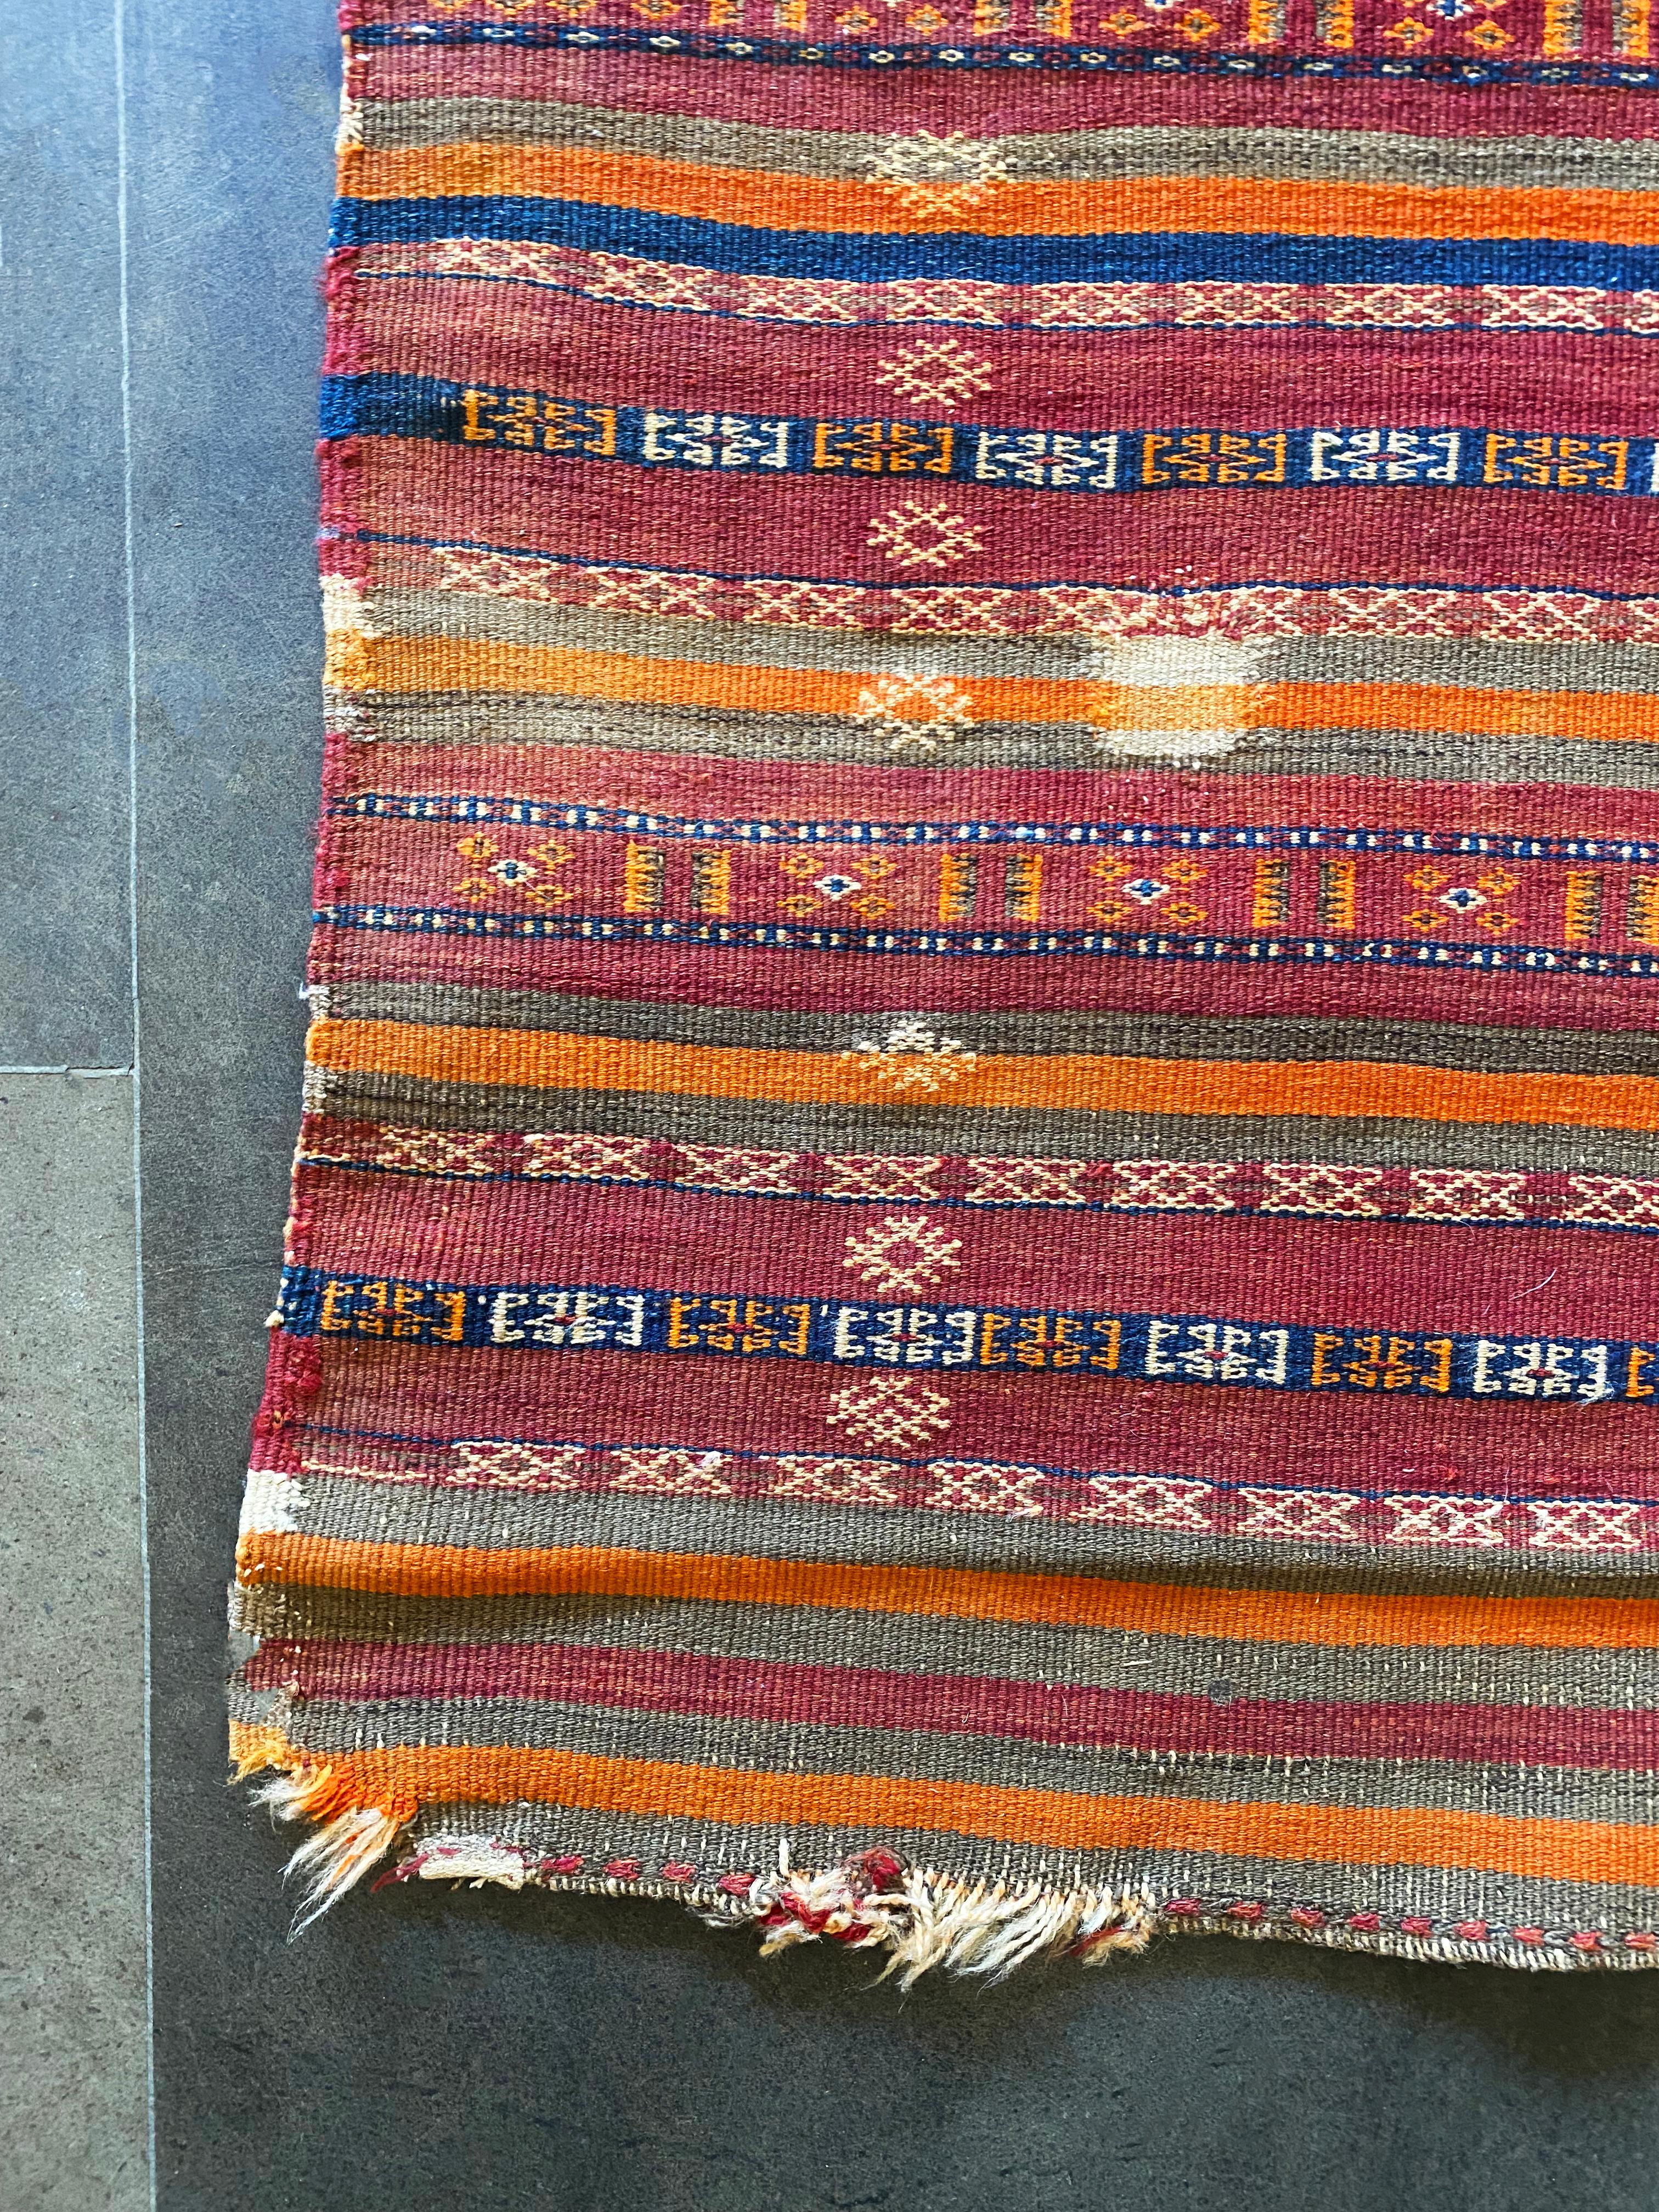 Antique Turkish Kilim Rug, Tribal Motifs, Striking Colour, Early 20th Century In Fair Condition For Sale In Jimbaran, Bali